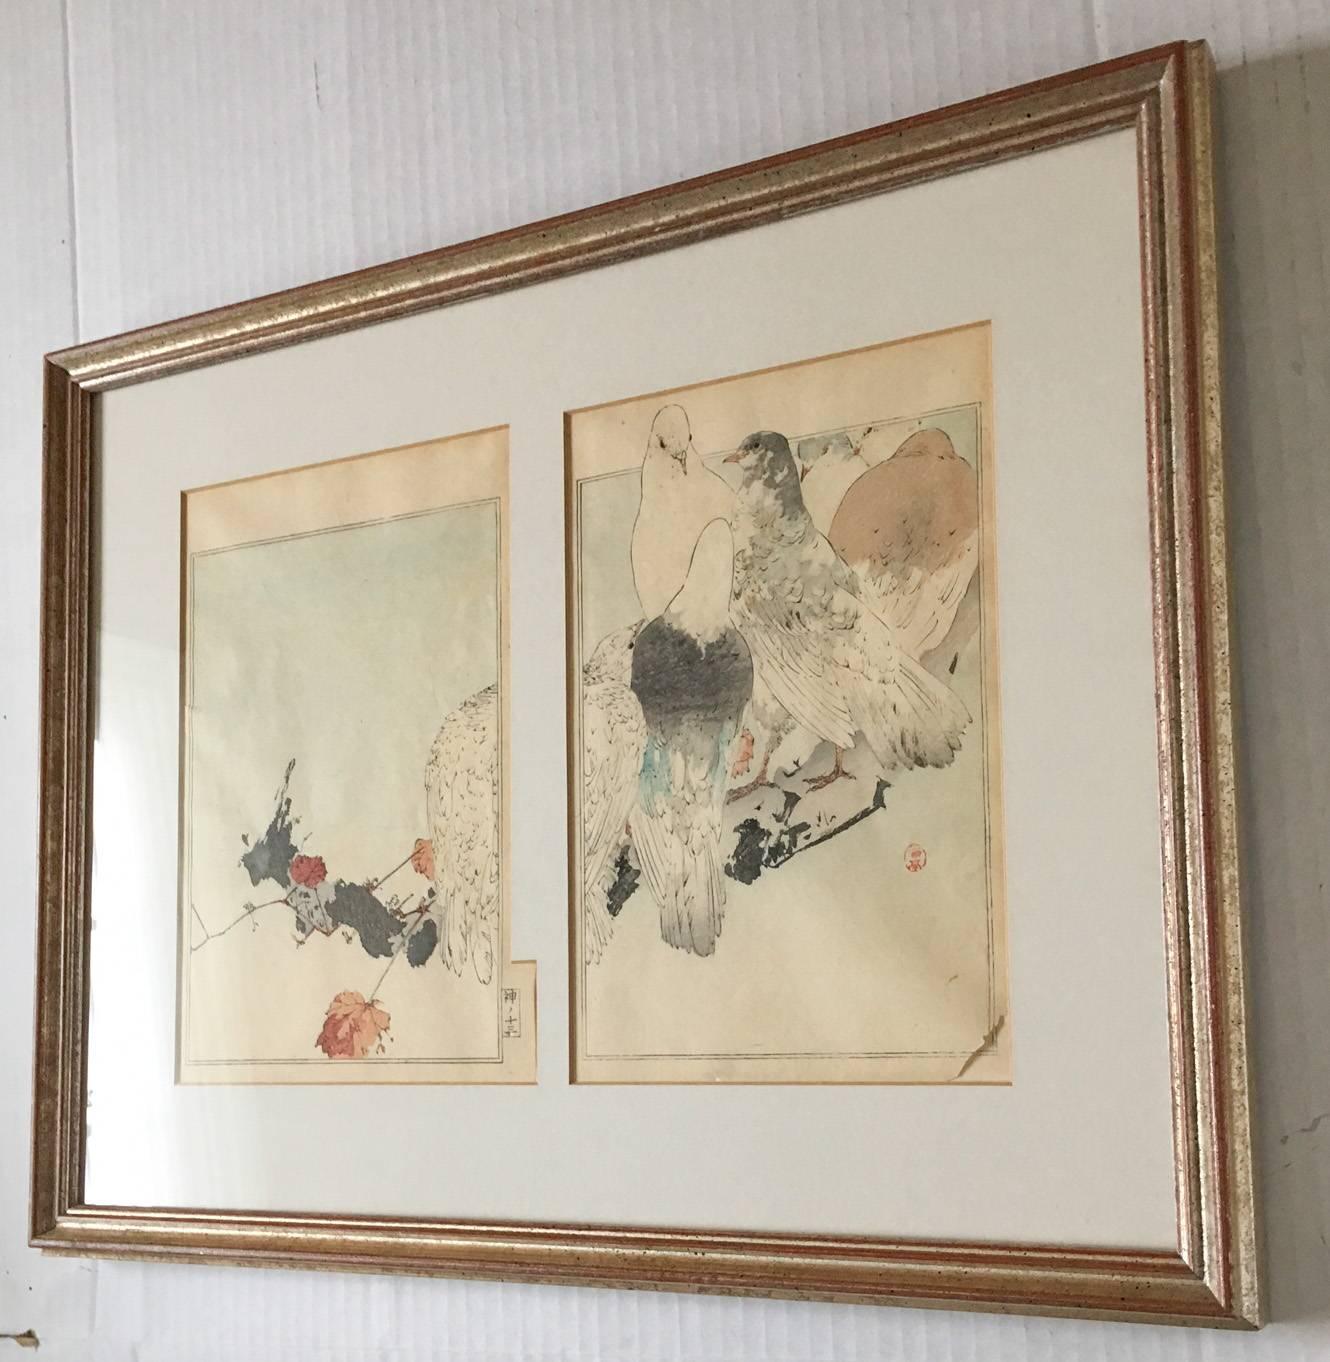 Offered is an exquisitely detailed Japanese pen and watercolor painting of five pigeons on a branch. Both panels are worked in a delicate black pen outline, then colored with watercolor paint. Note the matting detail of the left panel with attention